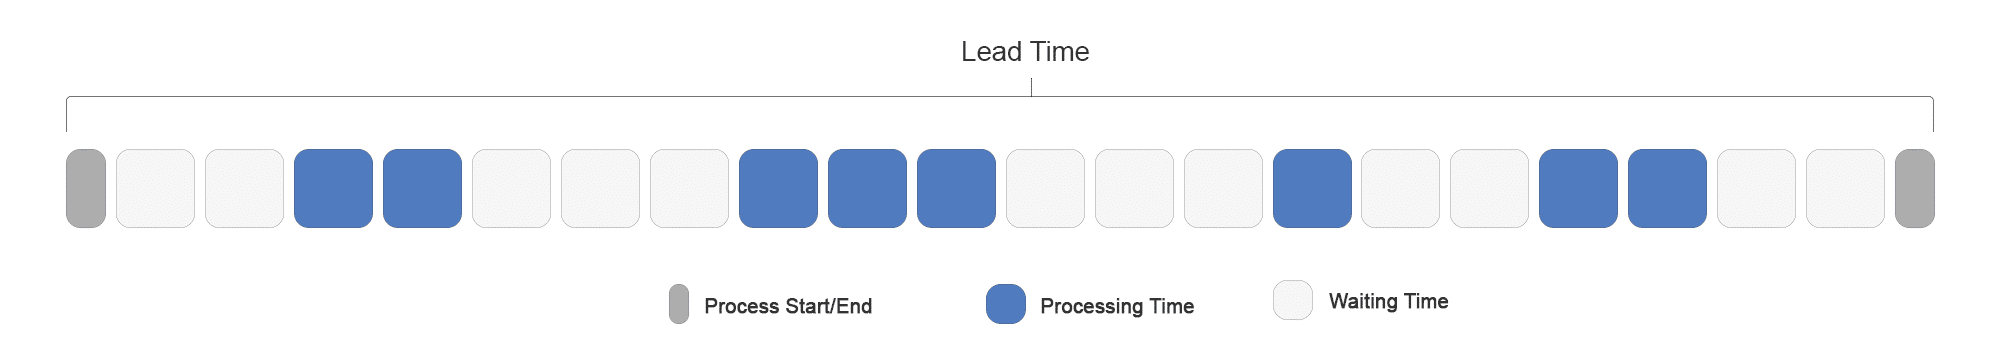 Lead time shown on an example from start to finish with processing time and waiting time.